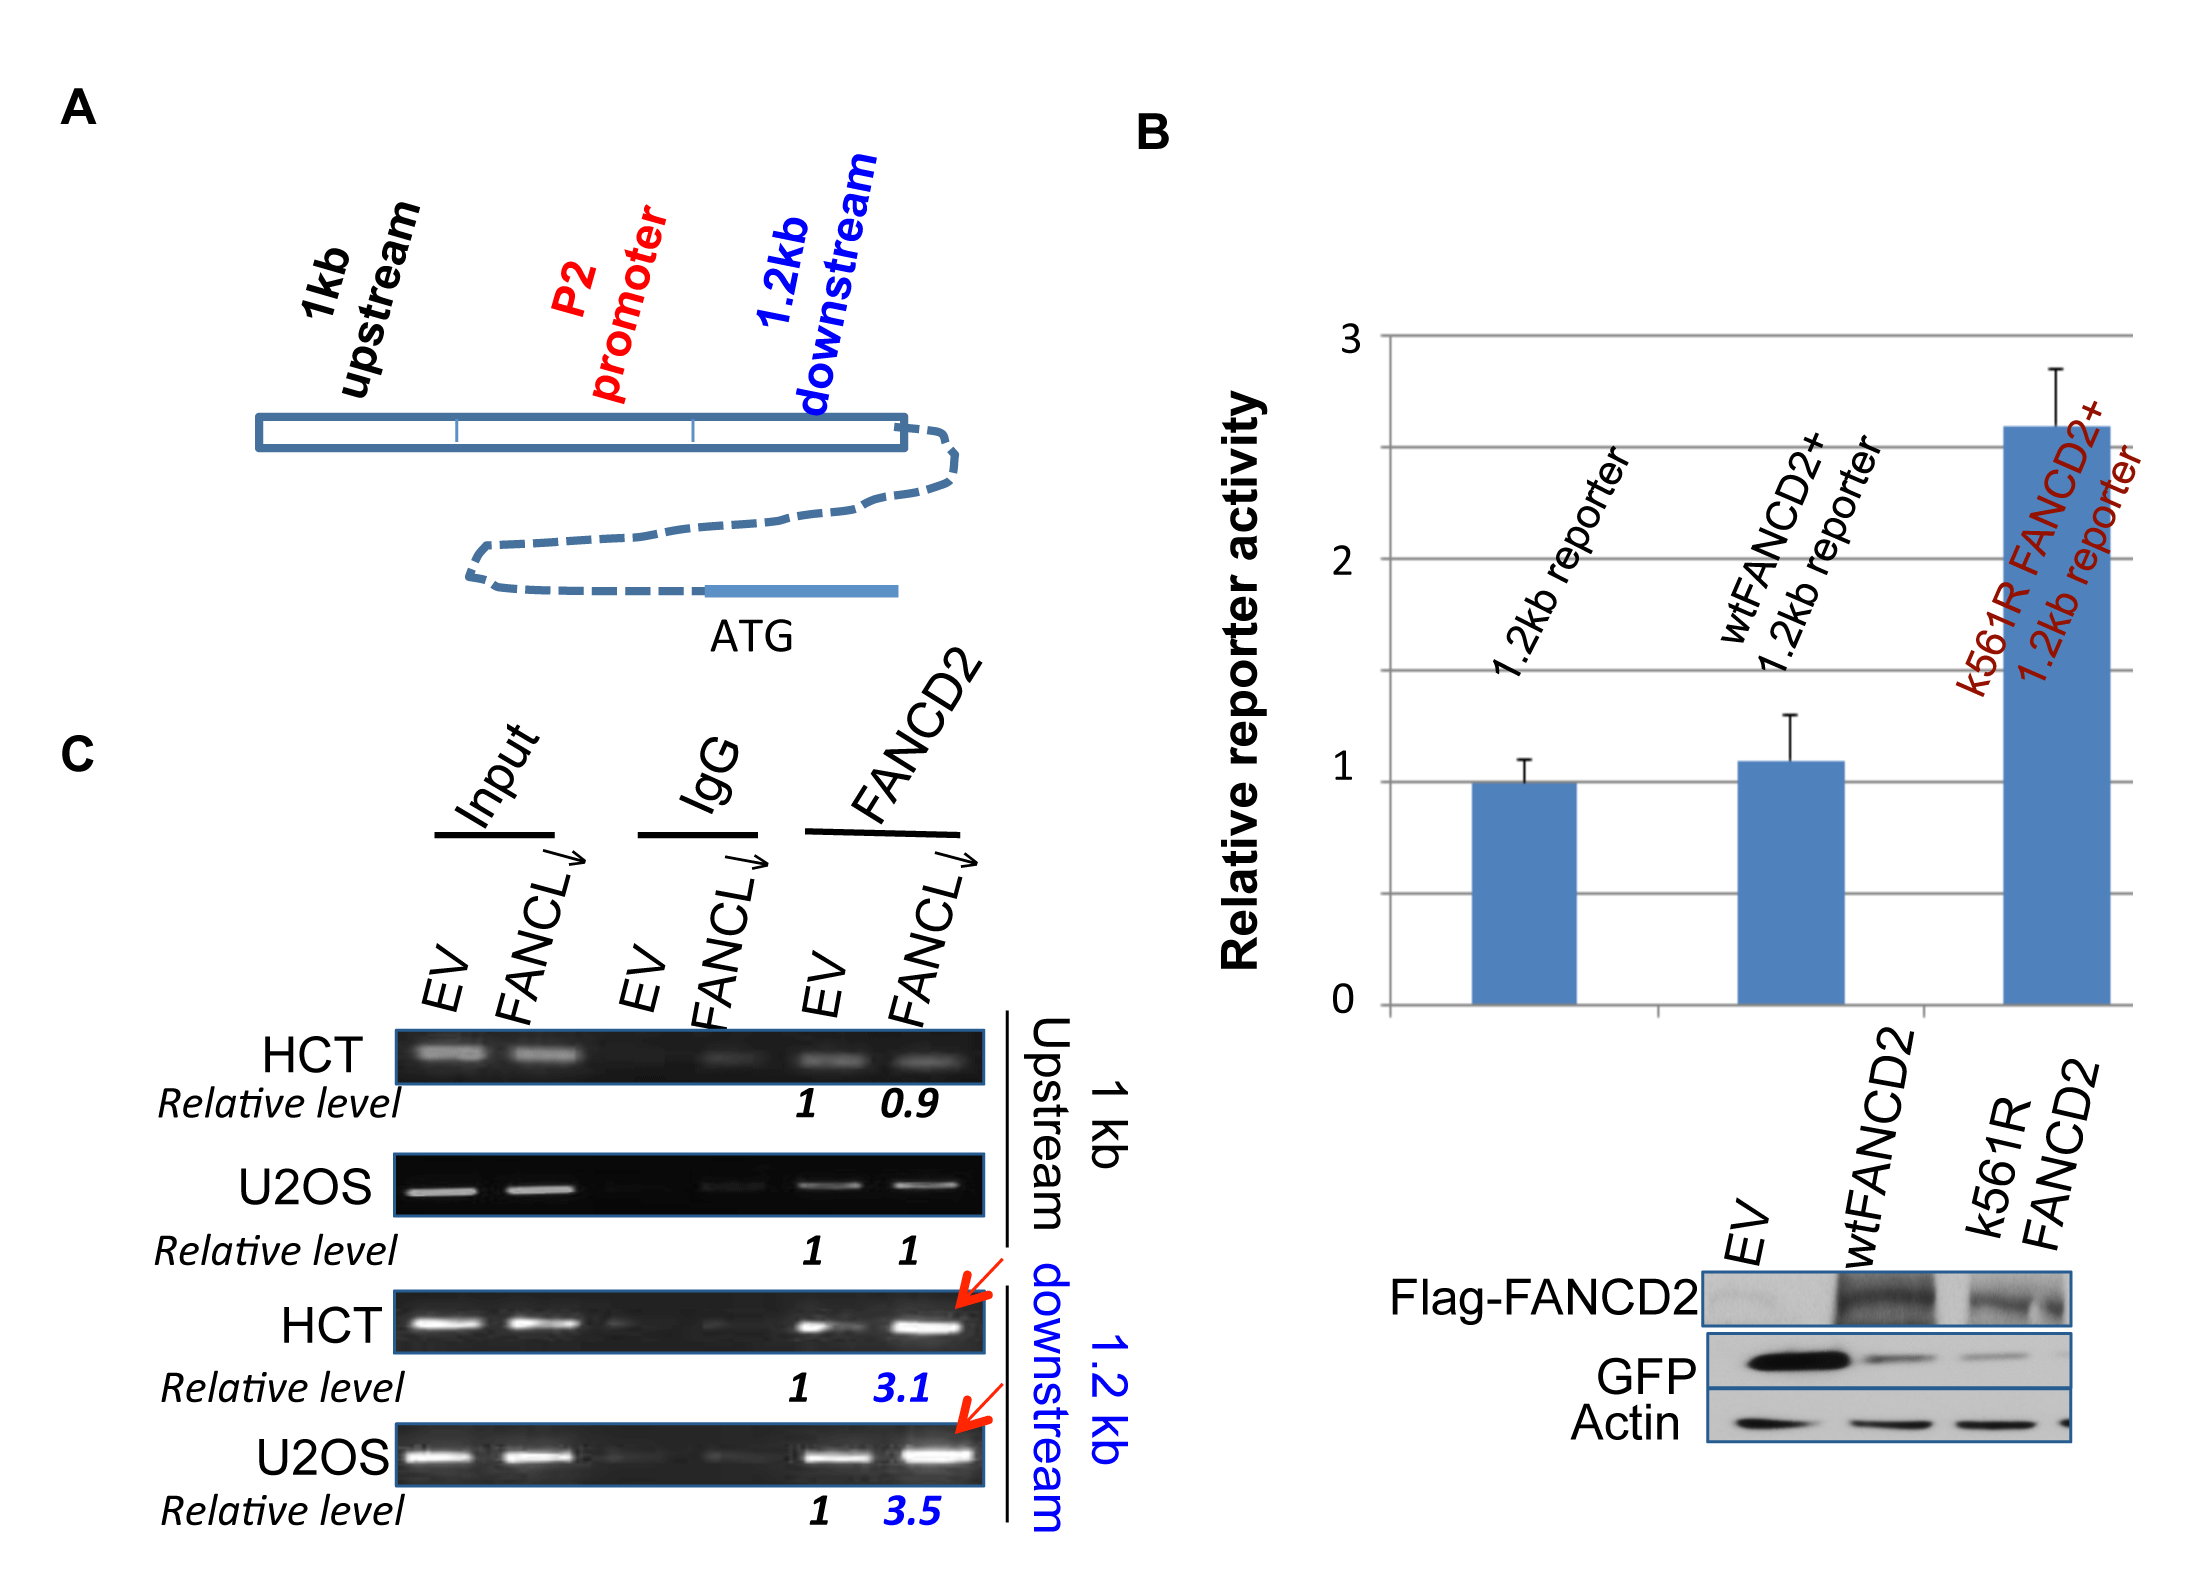 Inactivated FANCD2 promotes the expression of &#x2206;Np63 via a 1.2 kb DNA fragment downstream of the P2 promoter.